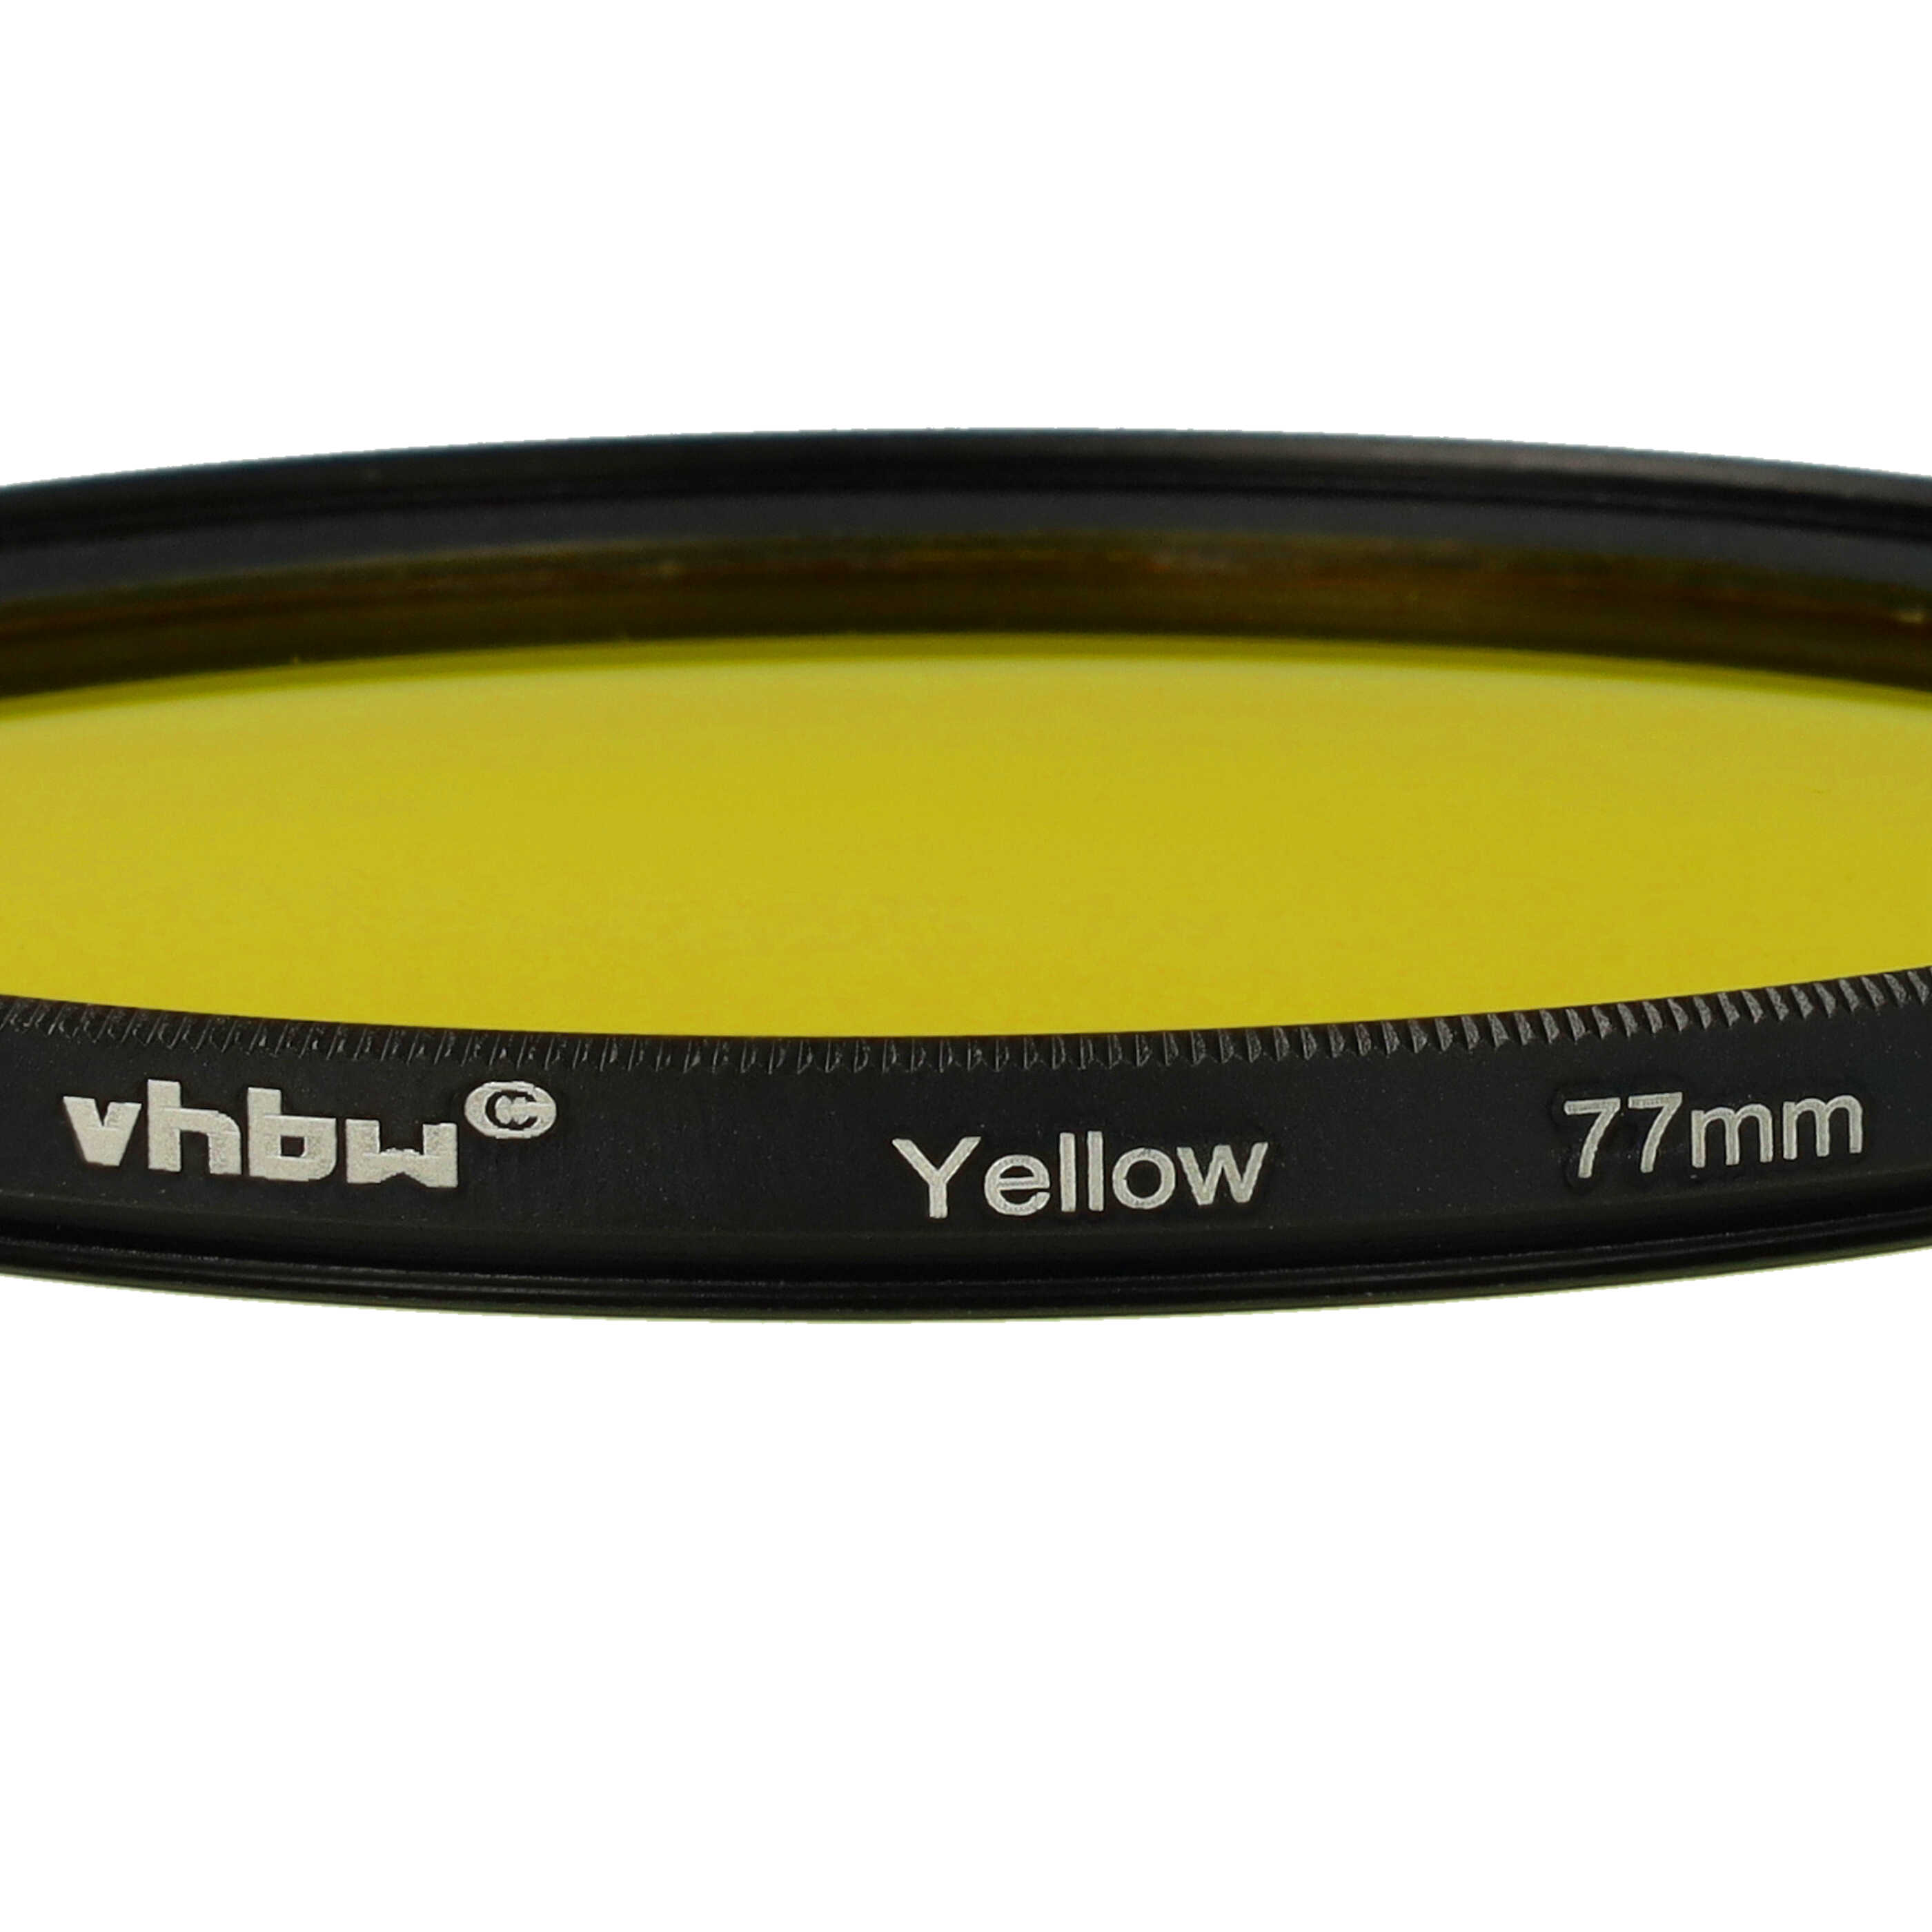 Coloured Filter, Yellow suitable for Camera Lenses with 77 mm Filter Thread - Yellow Filter